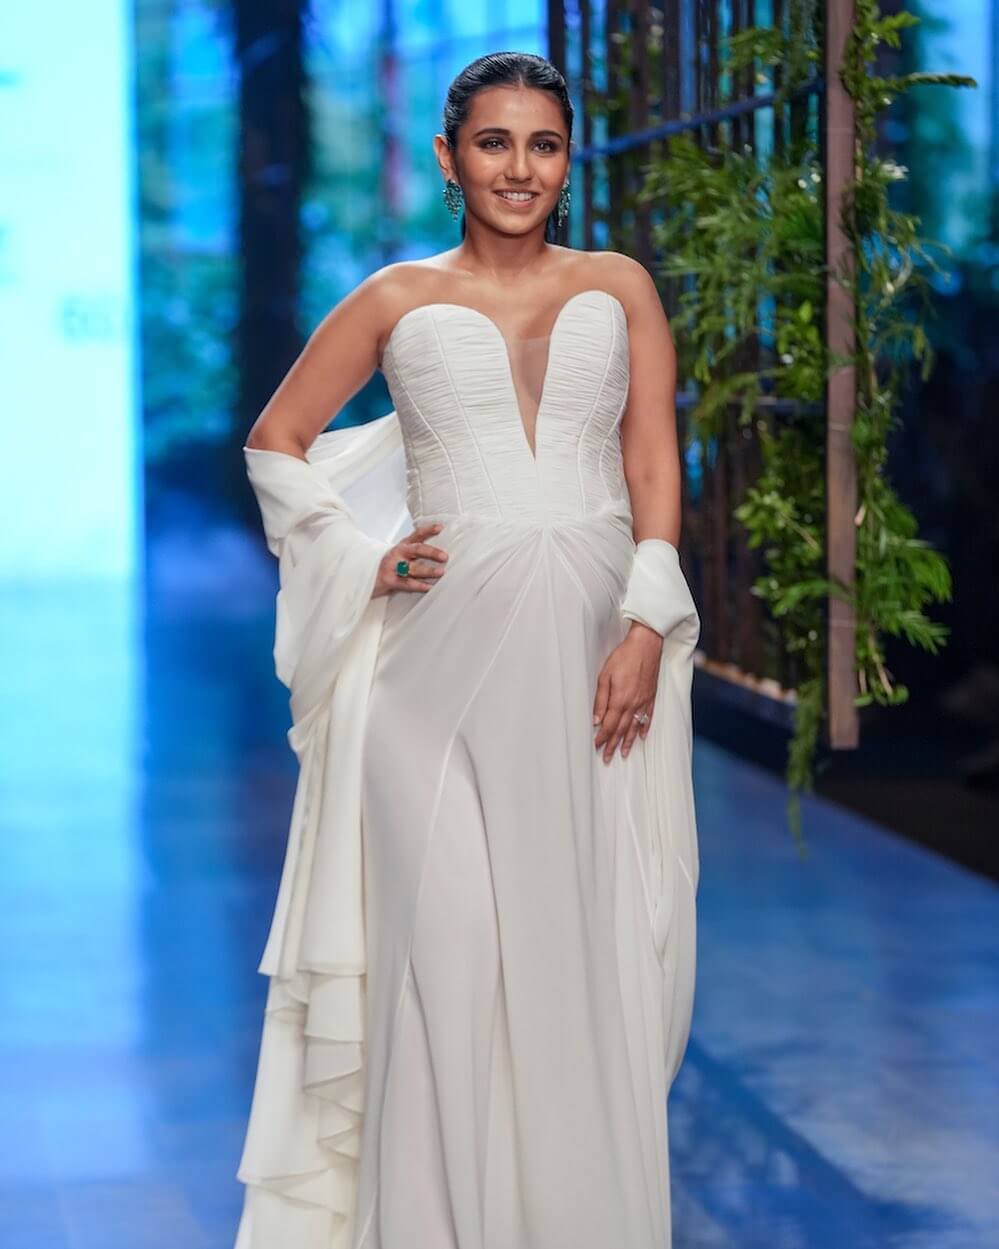 Lakme Fashion Week Bollywood Celebrities Spotted At The Runway - Masoom Minawal Mehta's Stunning And Elegante look In Off-shoulder White One-Piece Dress